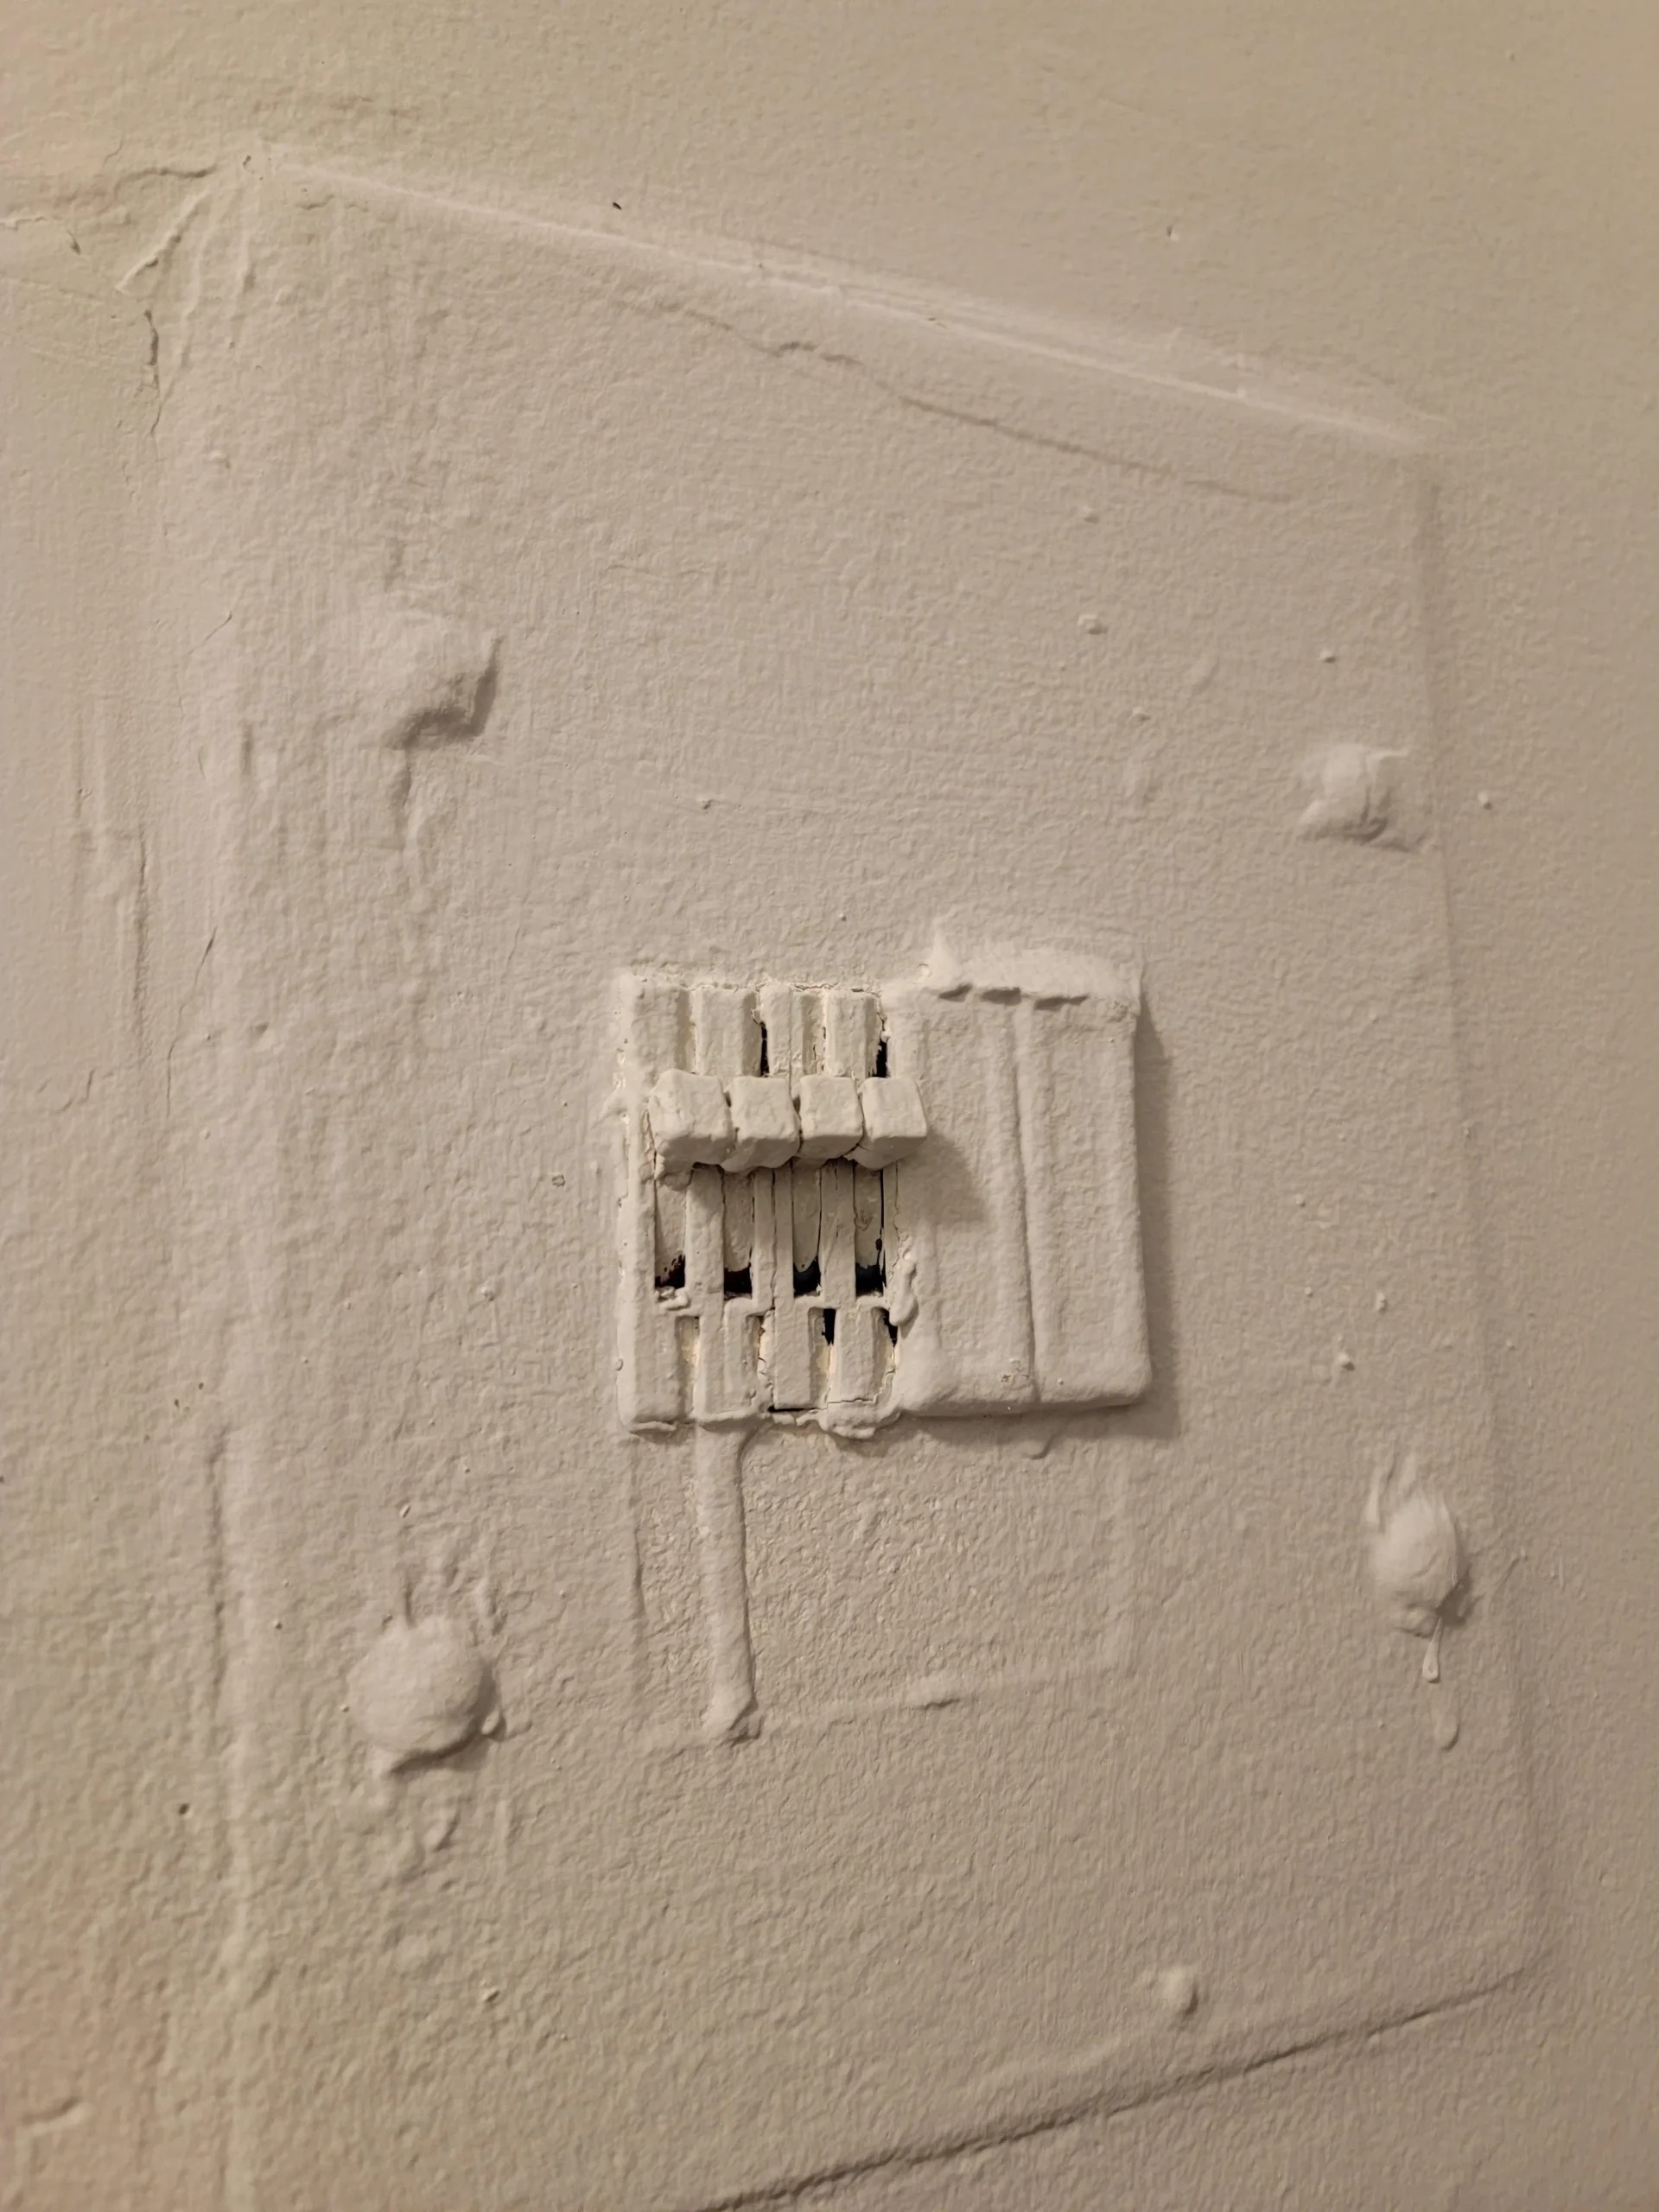 infuriating landlords - landlord paint over light switch